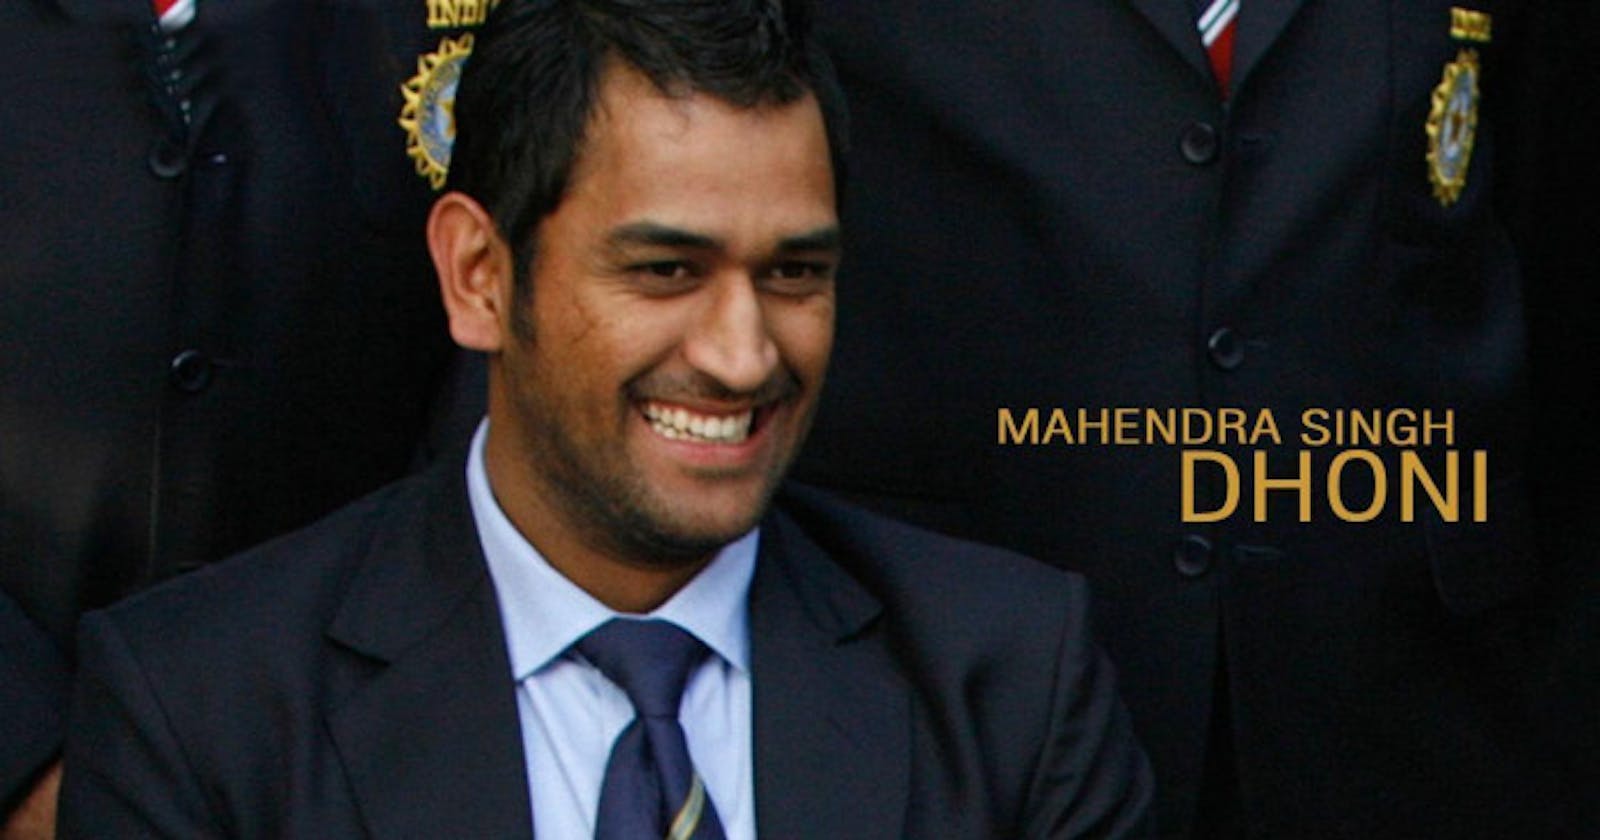 Learnings from Mahendra Singh Dhoni (MSD)